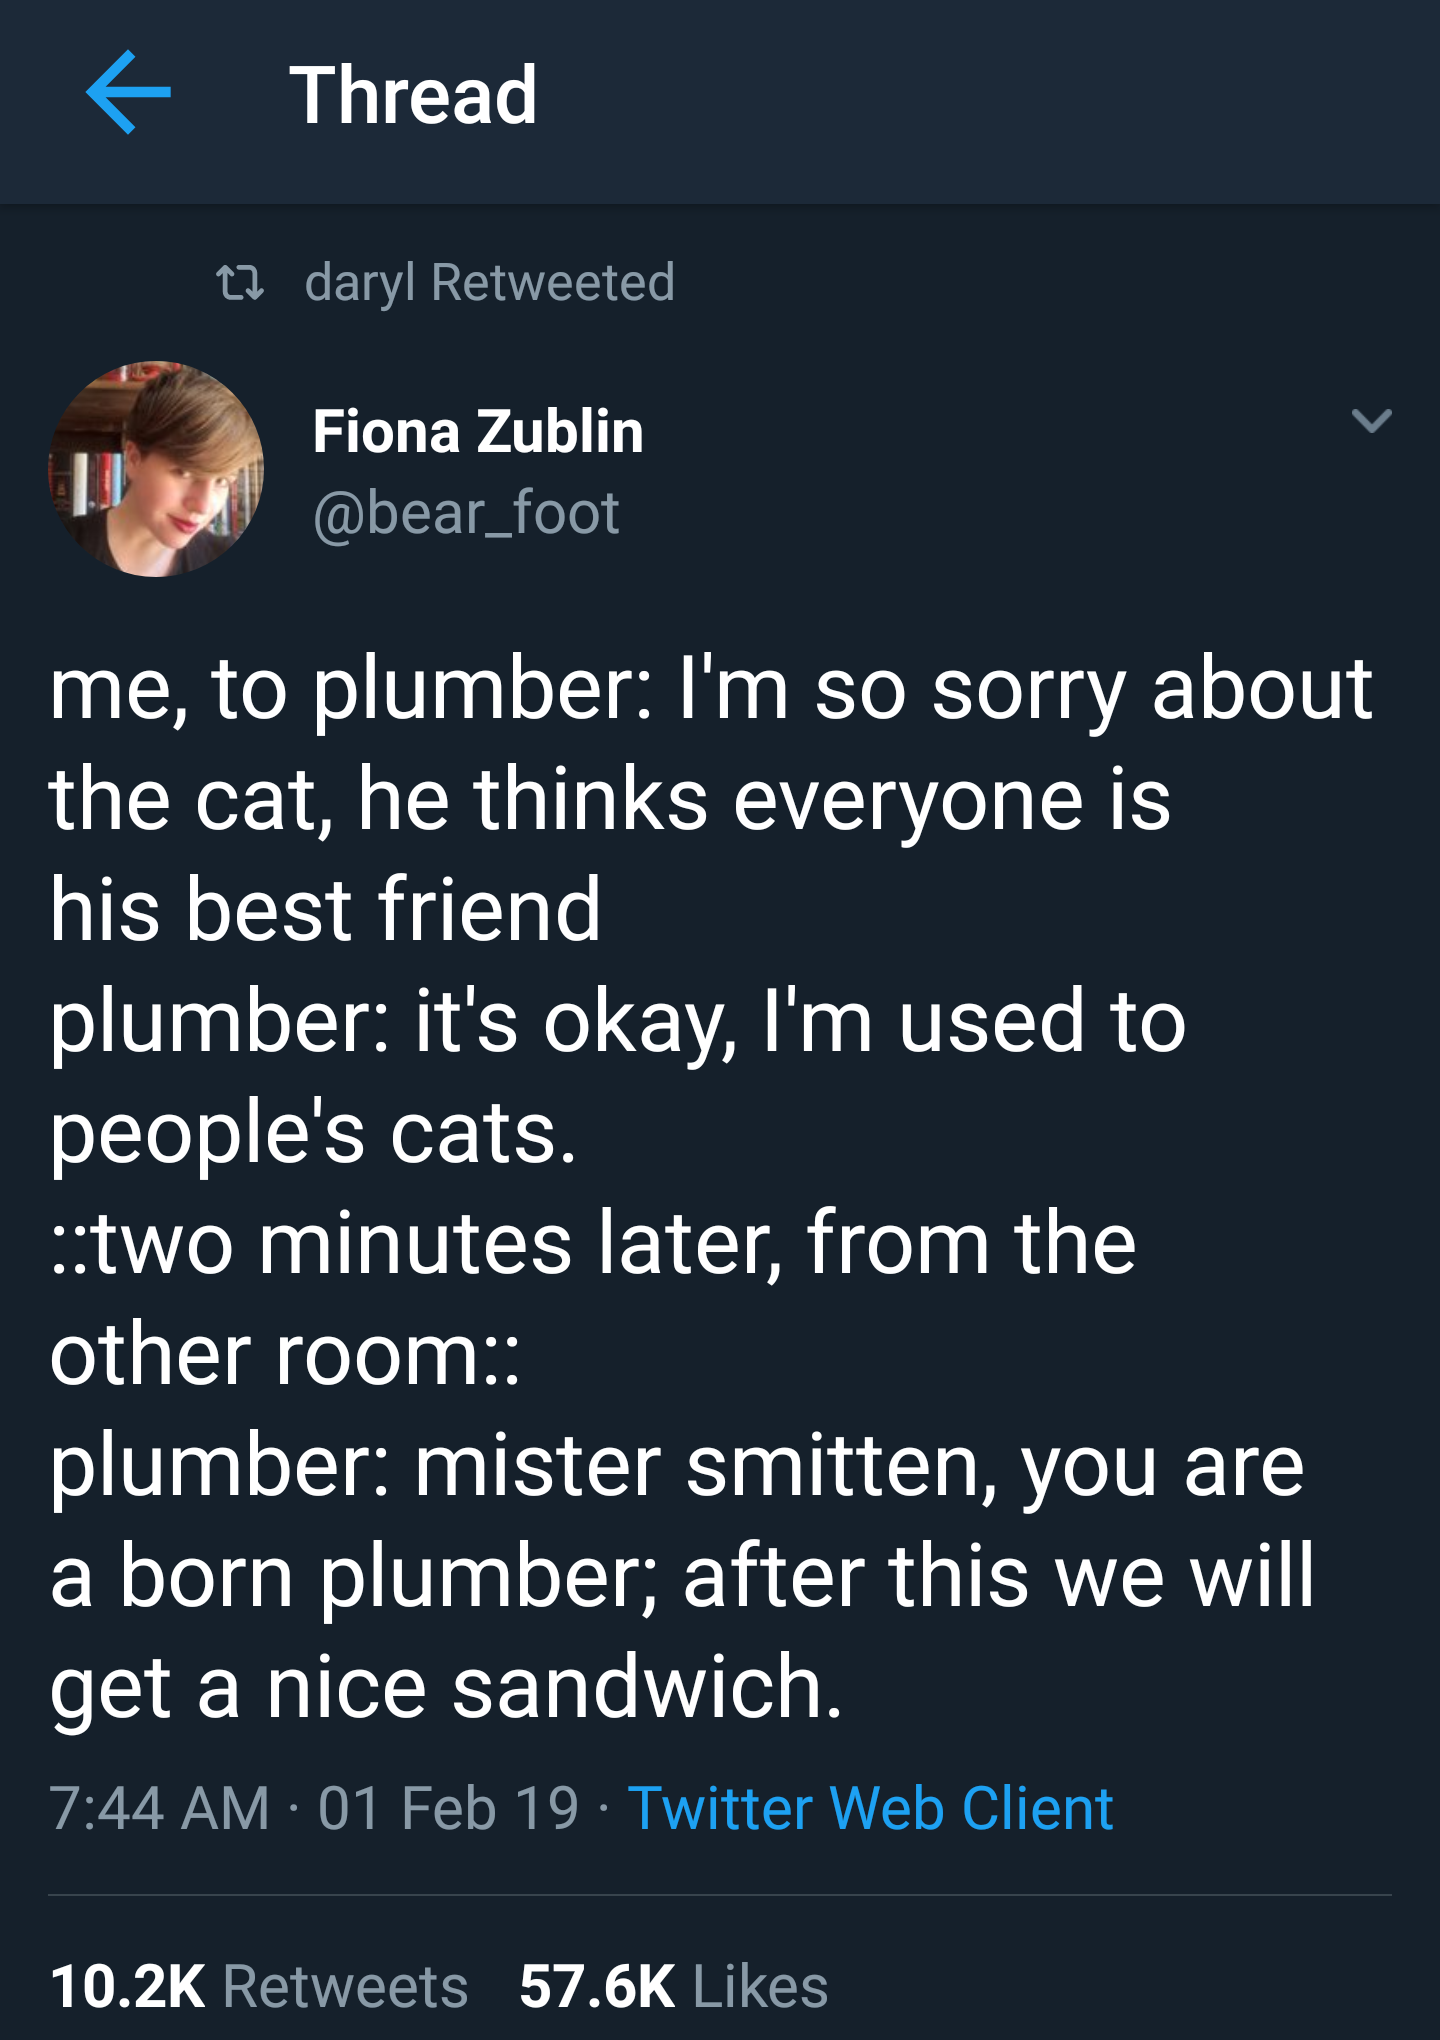 memes - mr smitten - E Thread 22 daryl Retweeted Fiona Zublin me, to plumber I'm so sorry about the cat, he thinks everyone is his best friend plumber it's okay, I'm used to people's cats. two minutes later, from the other room plumber mister smitten, you